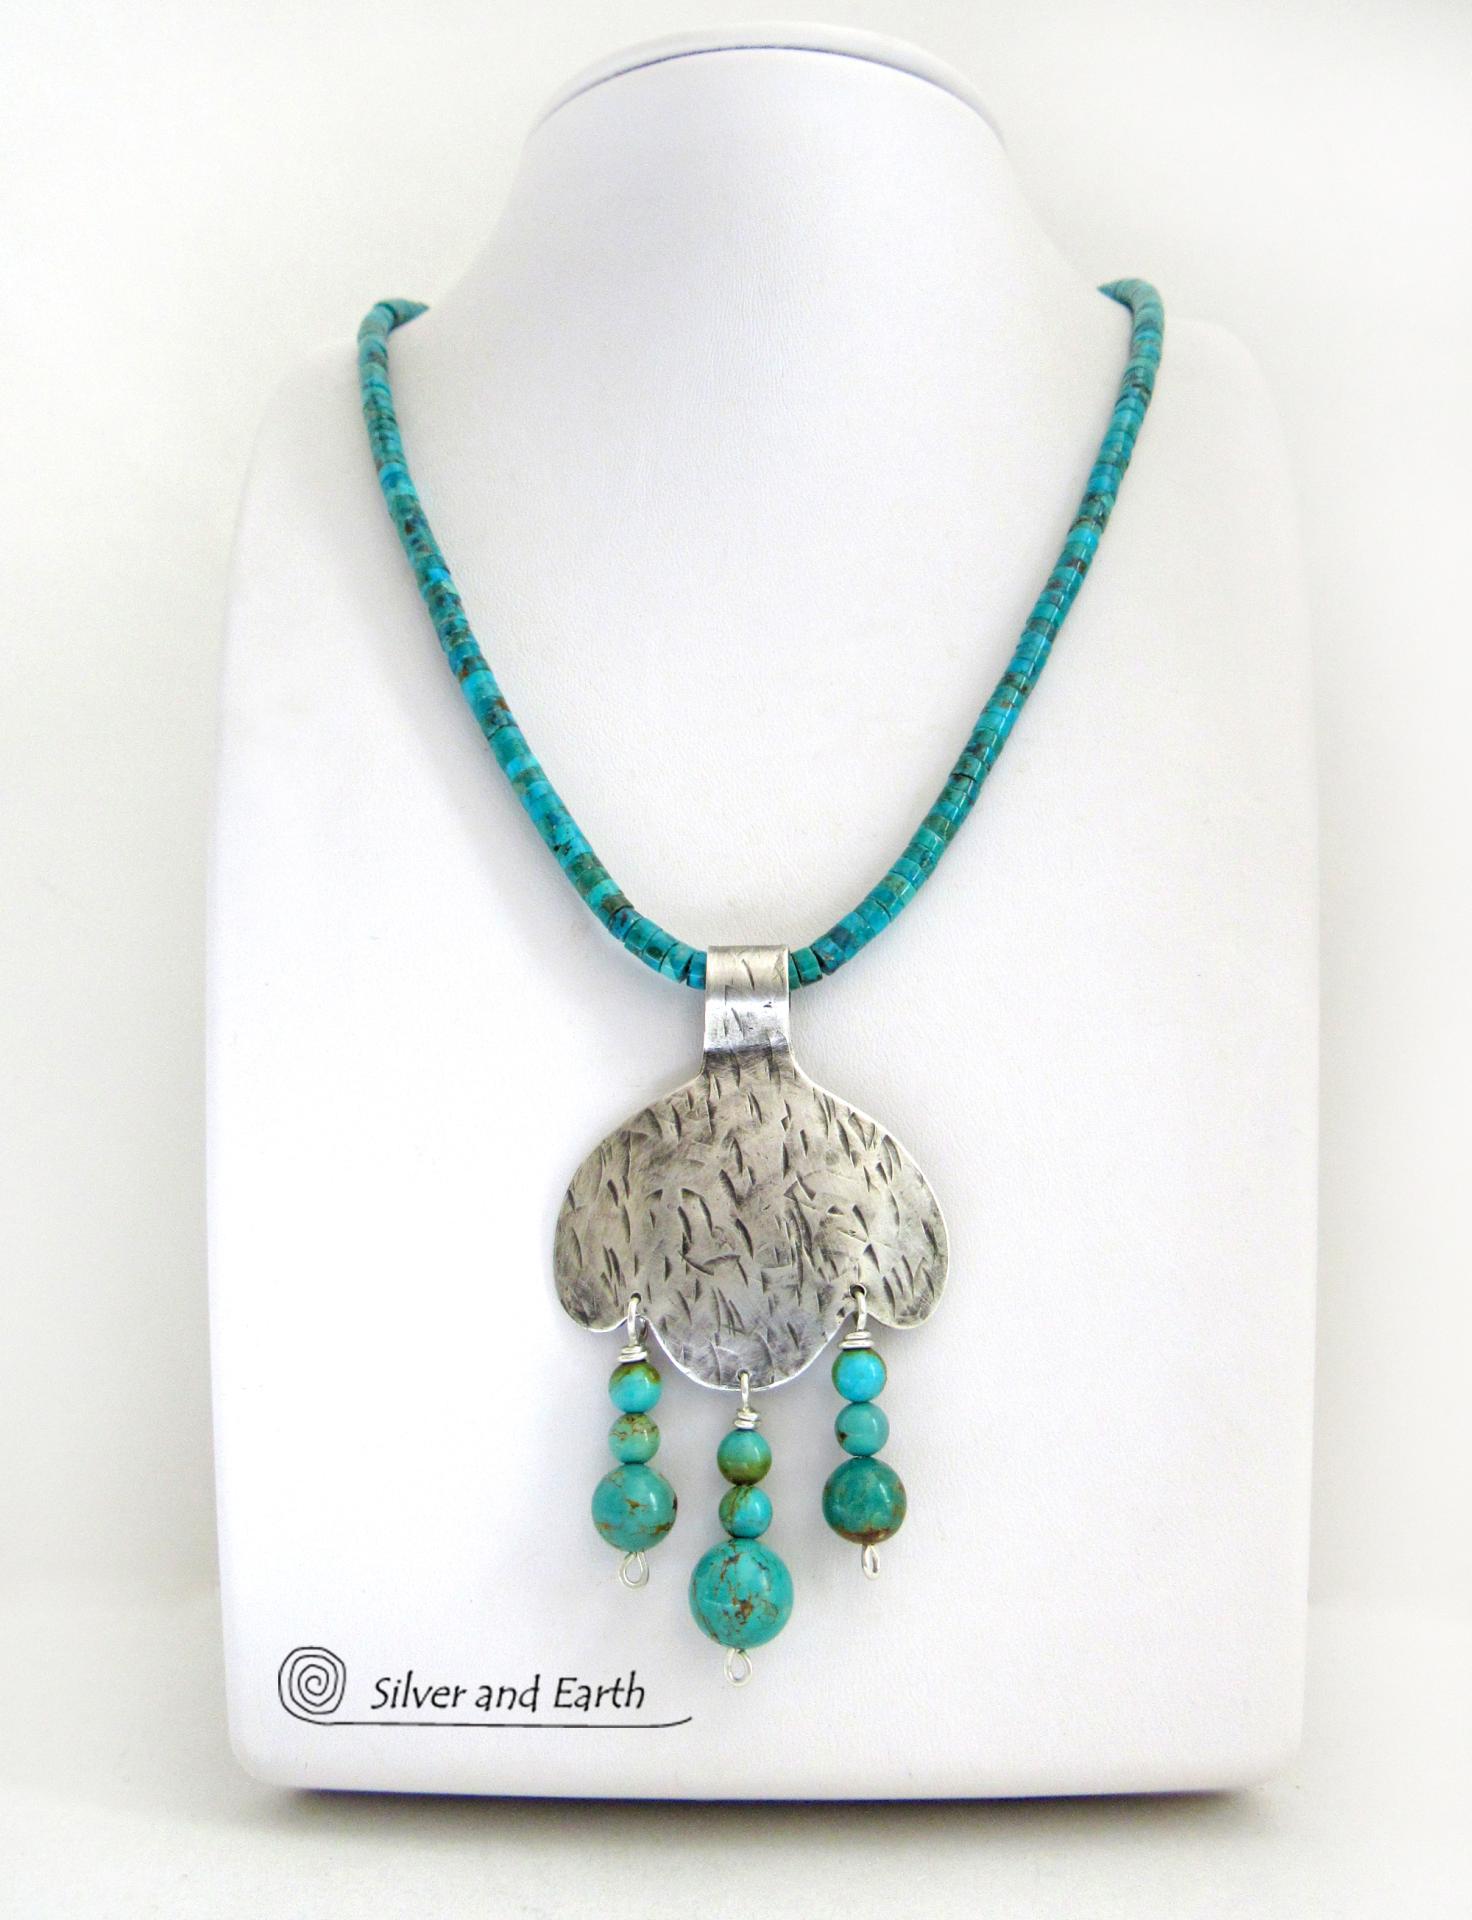 Sterling Silver Pendant with Turquoise Fringe Dangles on Turquoise Heishi Necklace - Southwestern Style Jewelry